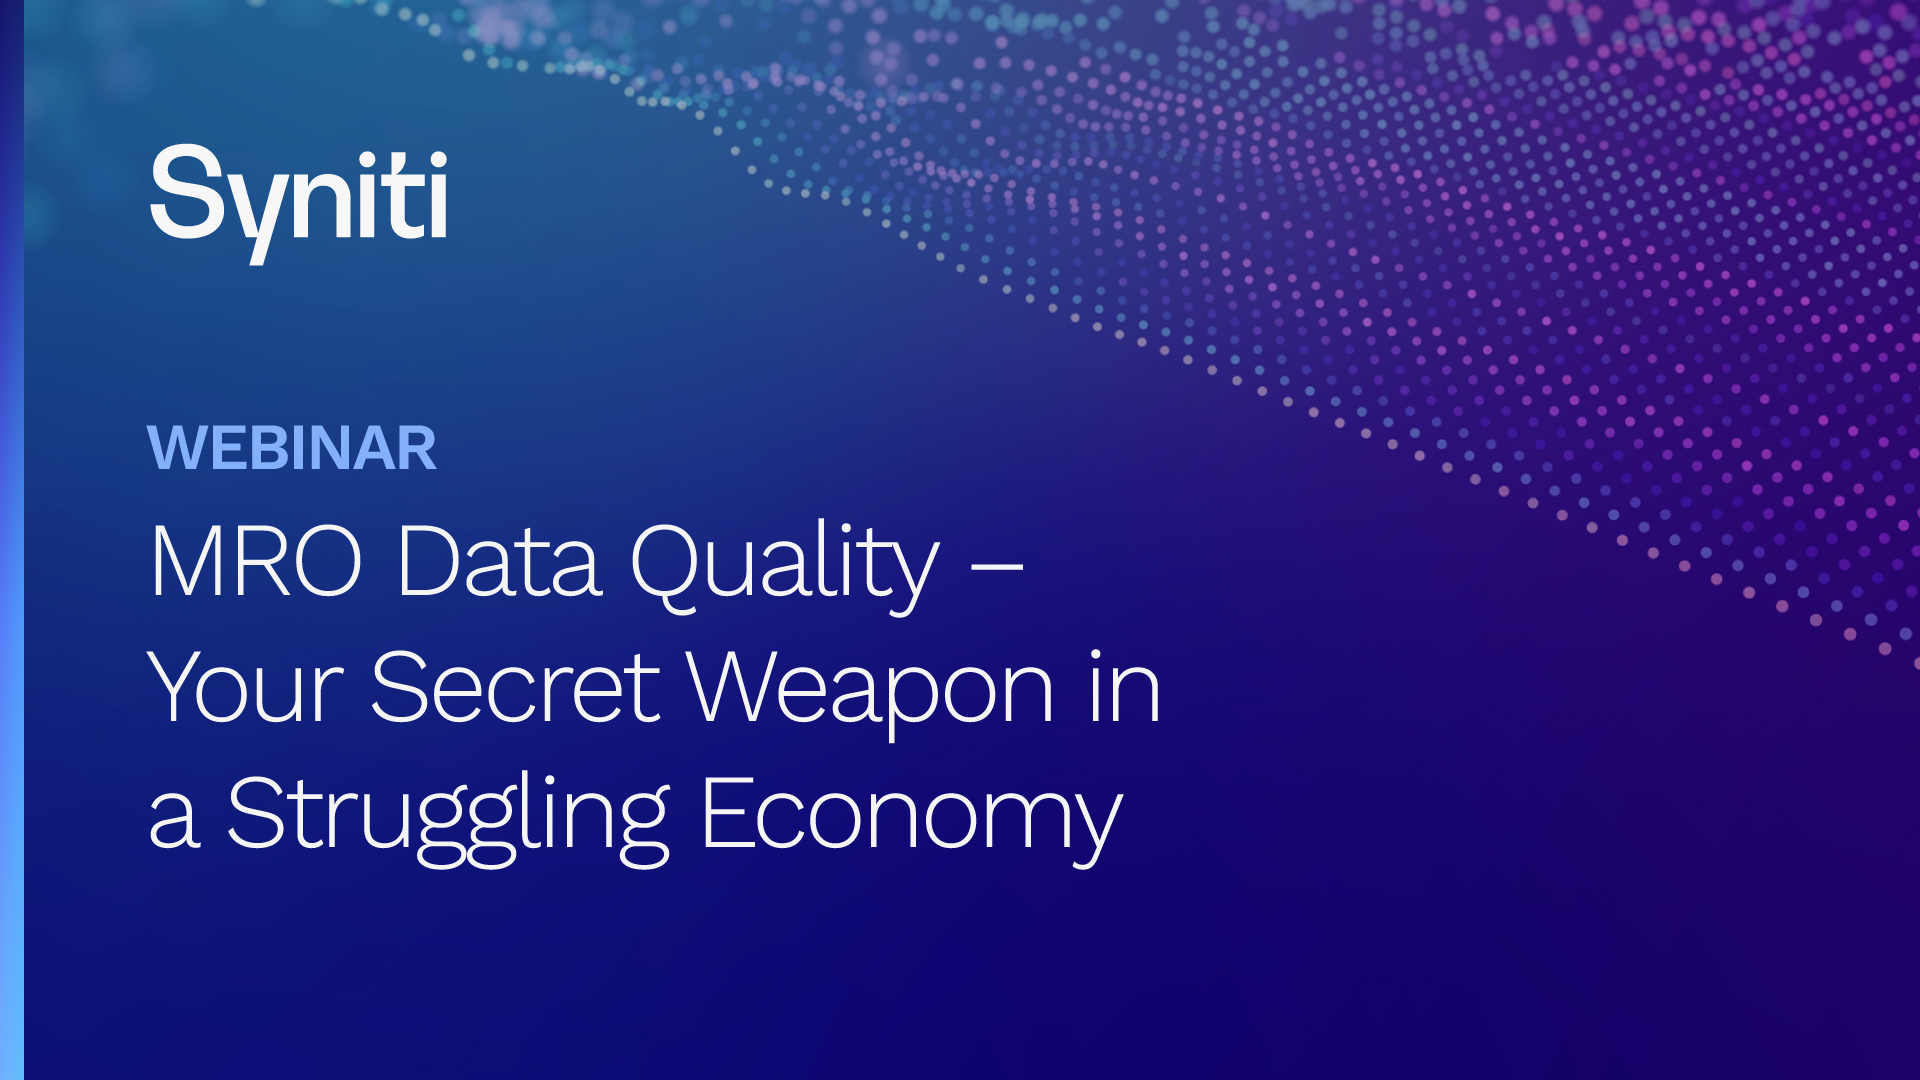 MRO Data Quality – Your Secret Weapon in a Struggling Economy